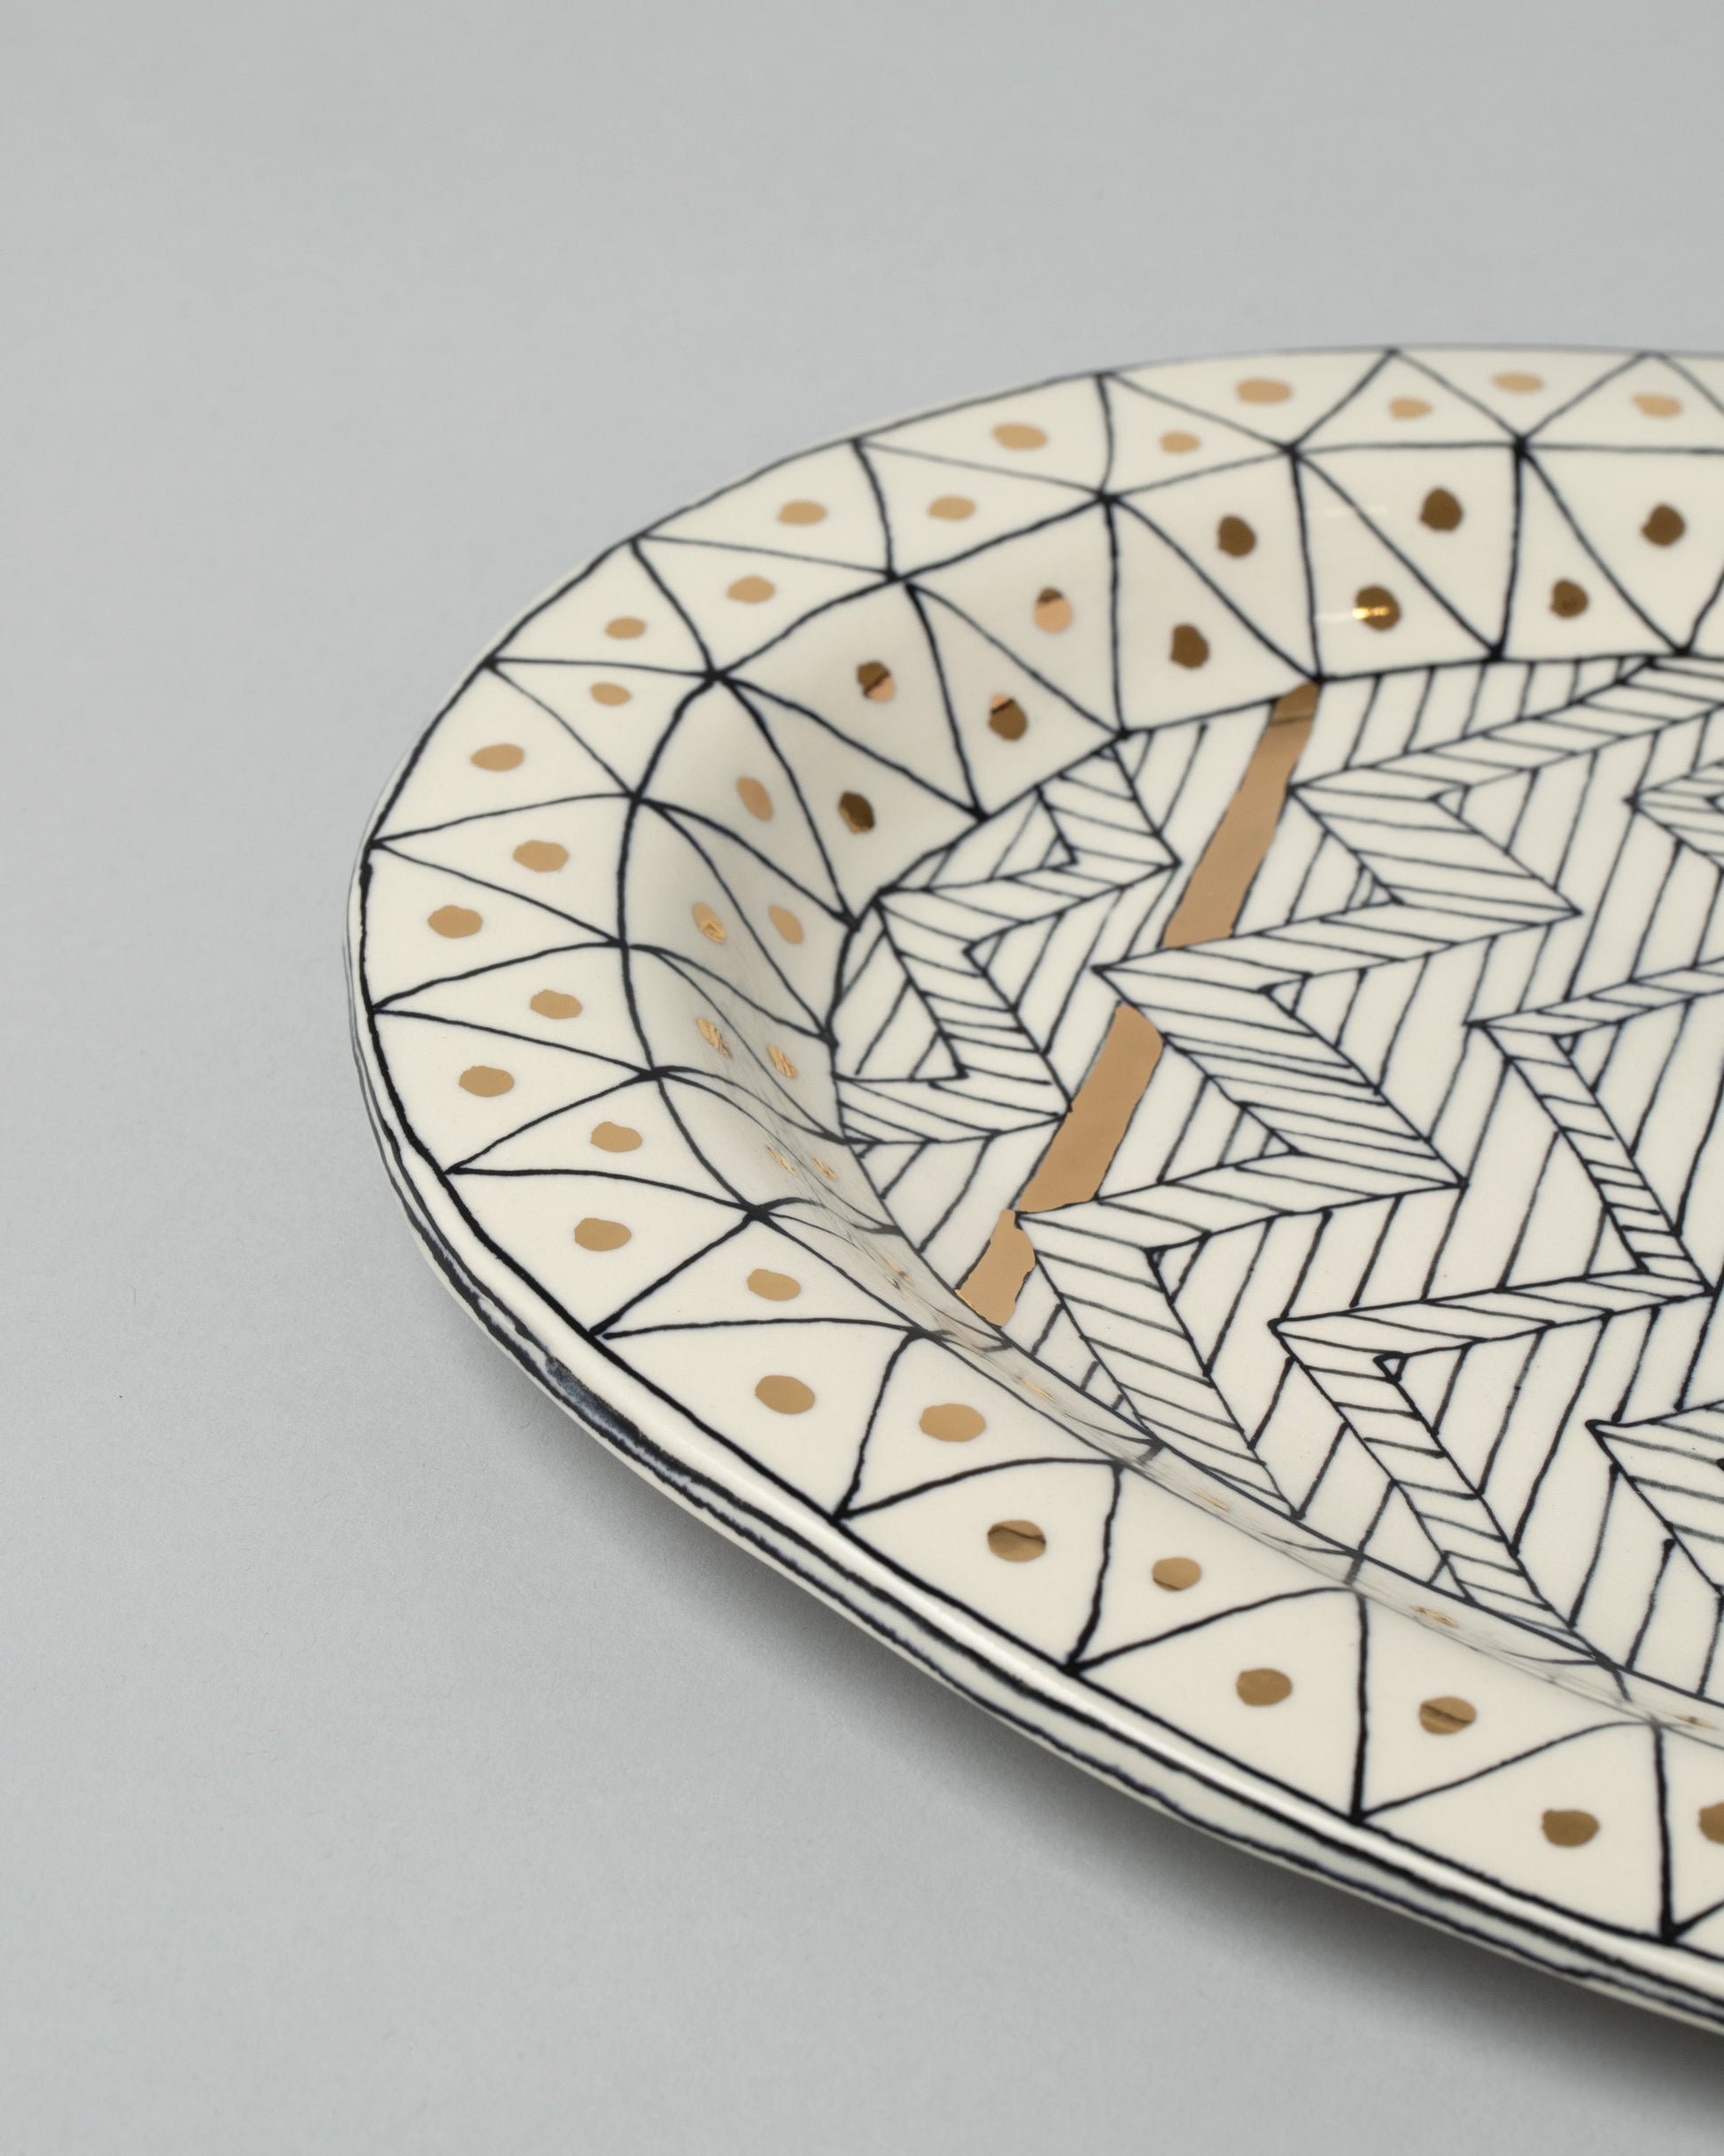 Closeup detail of the Suzanne Sullivan Oval Platter on light color background.